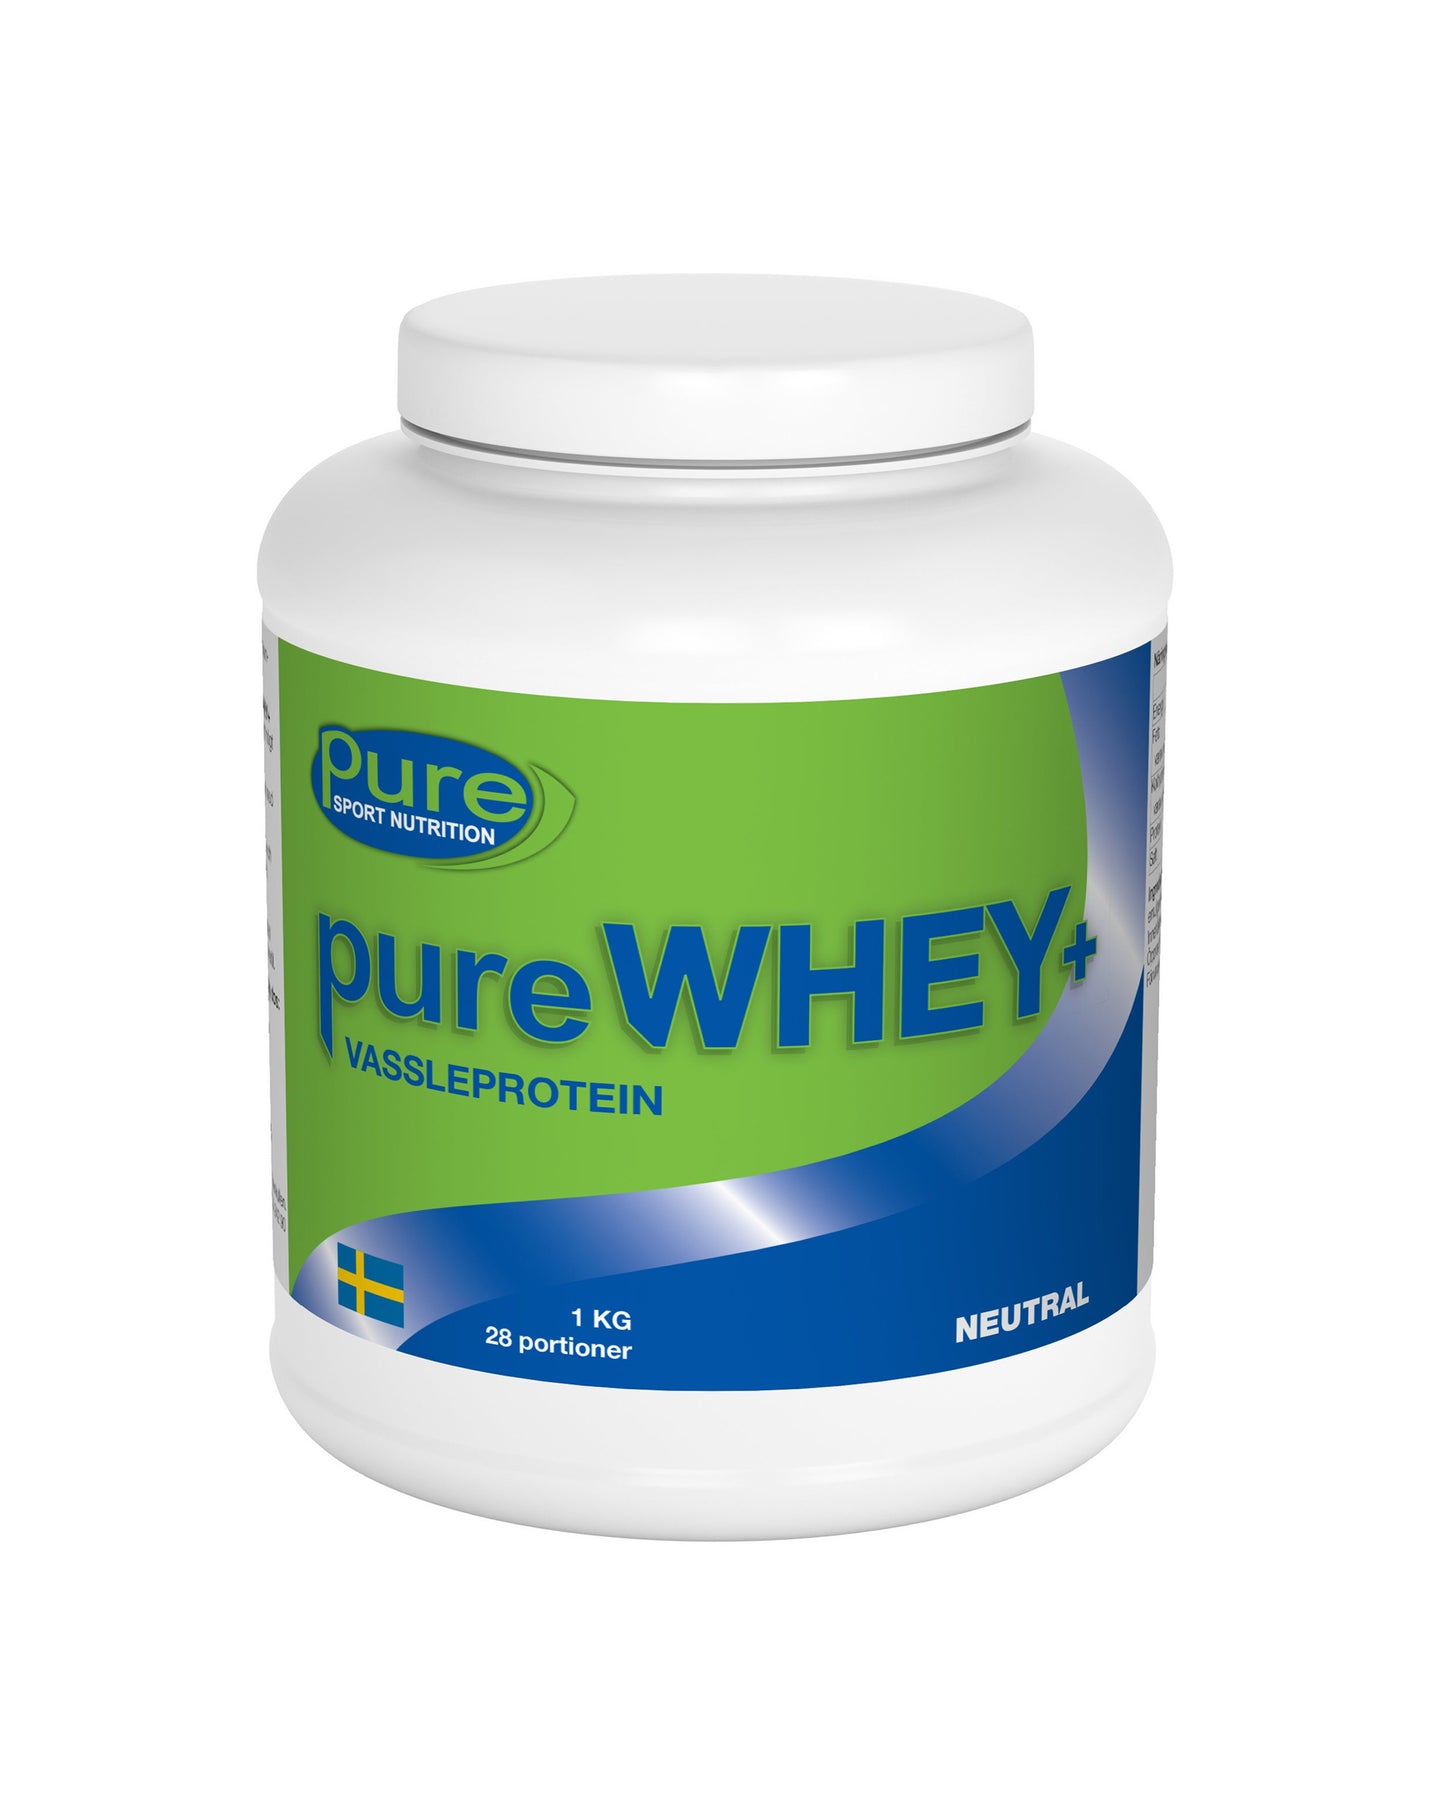 pure WHEY+ Neutral